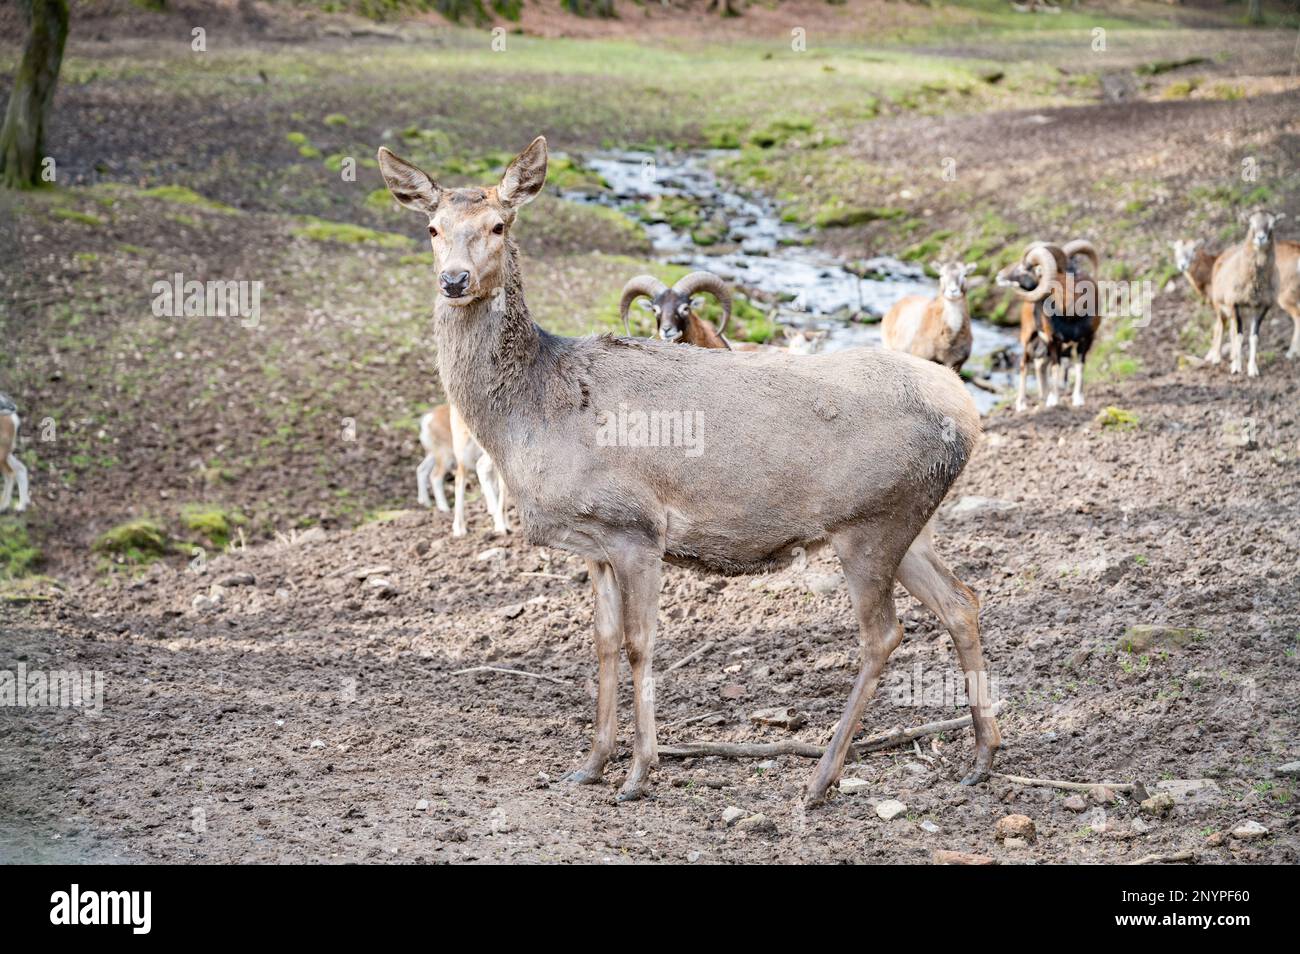 Doe, Female Deer Cow standing in front of a group of goats and billy goats, looking at camera, river in the background, Wildlife Park Brudergrund, Erb Stock Photo